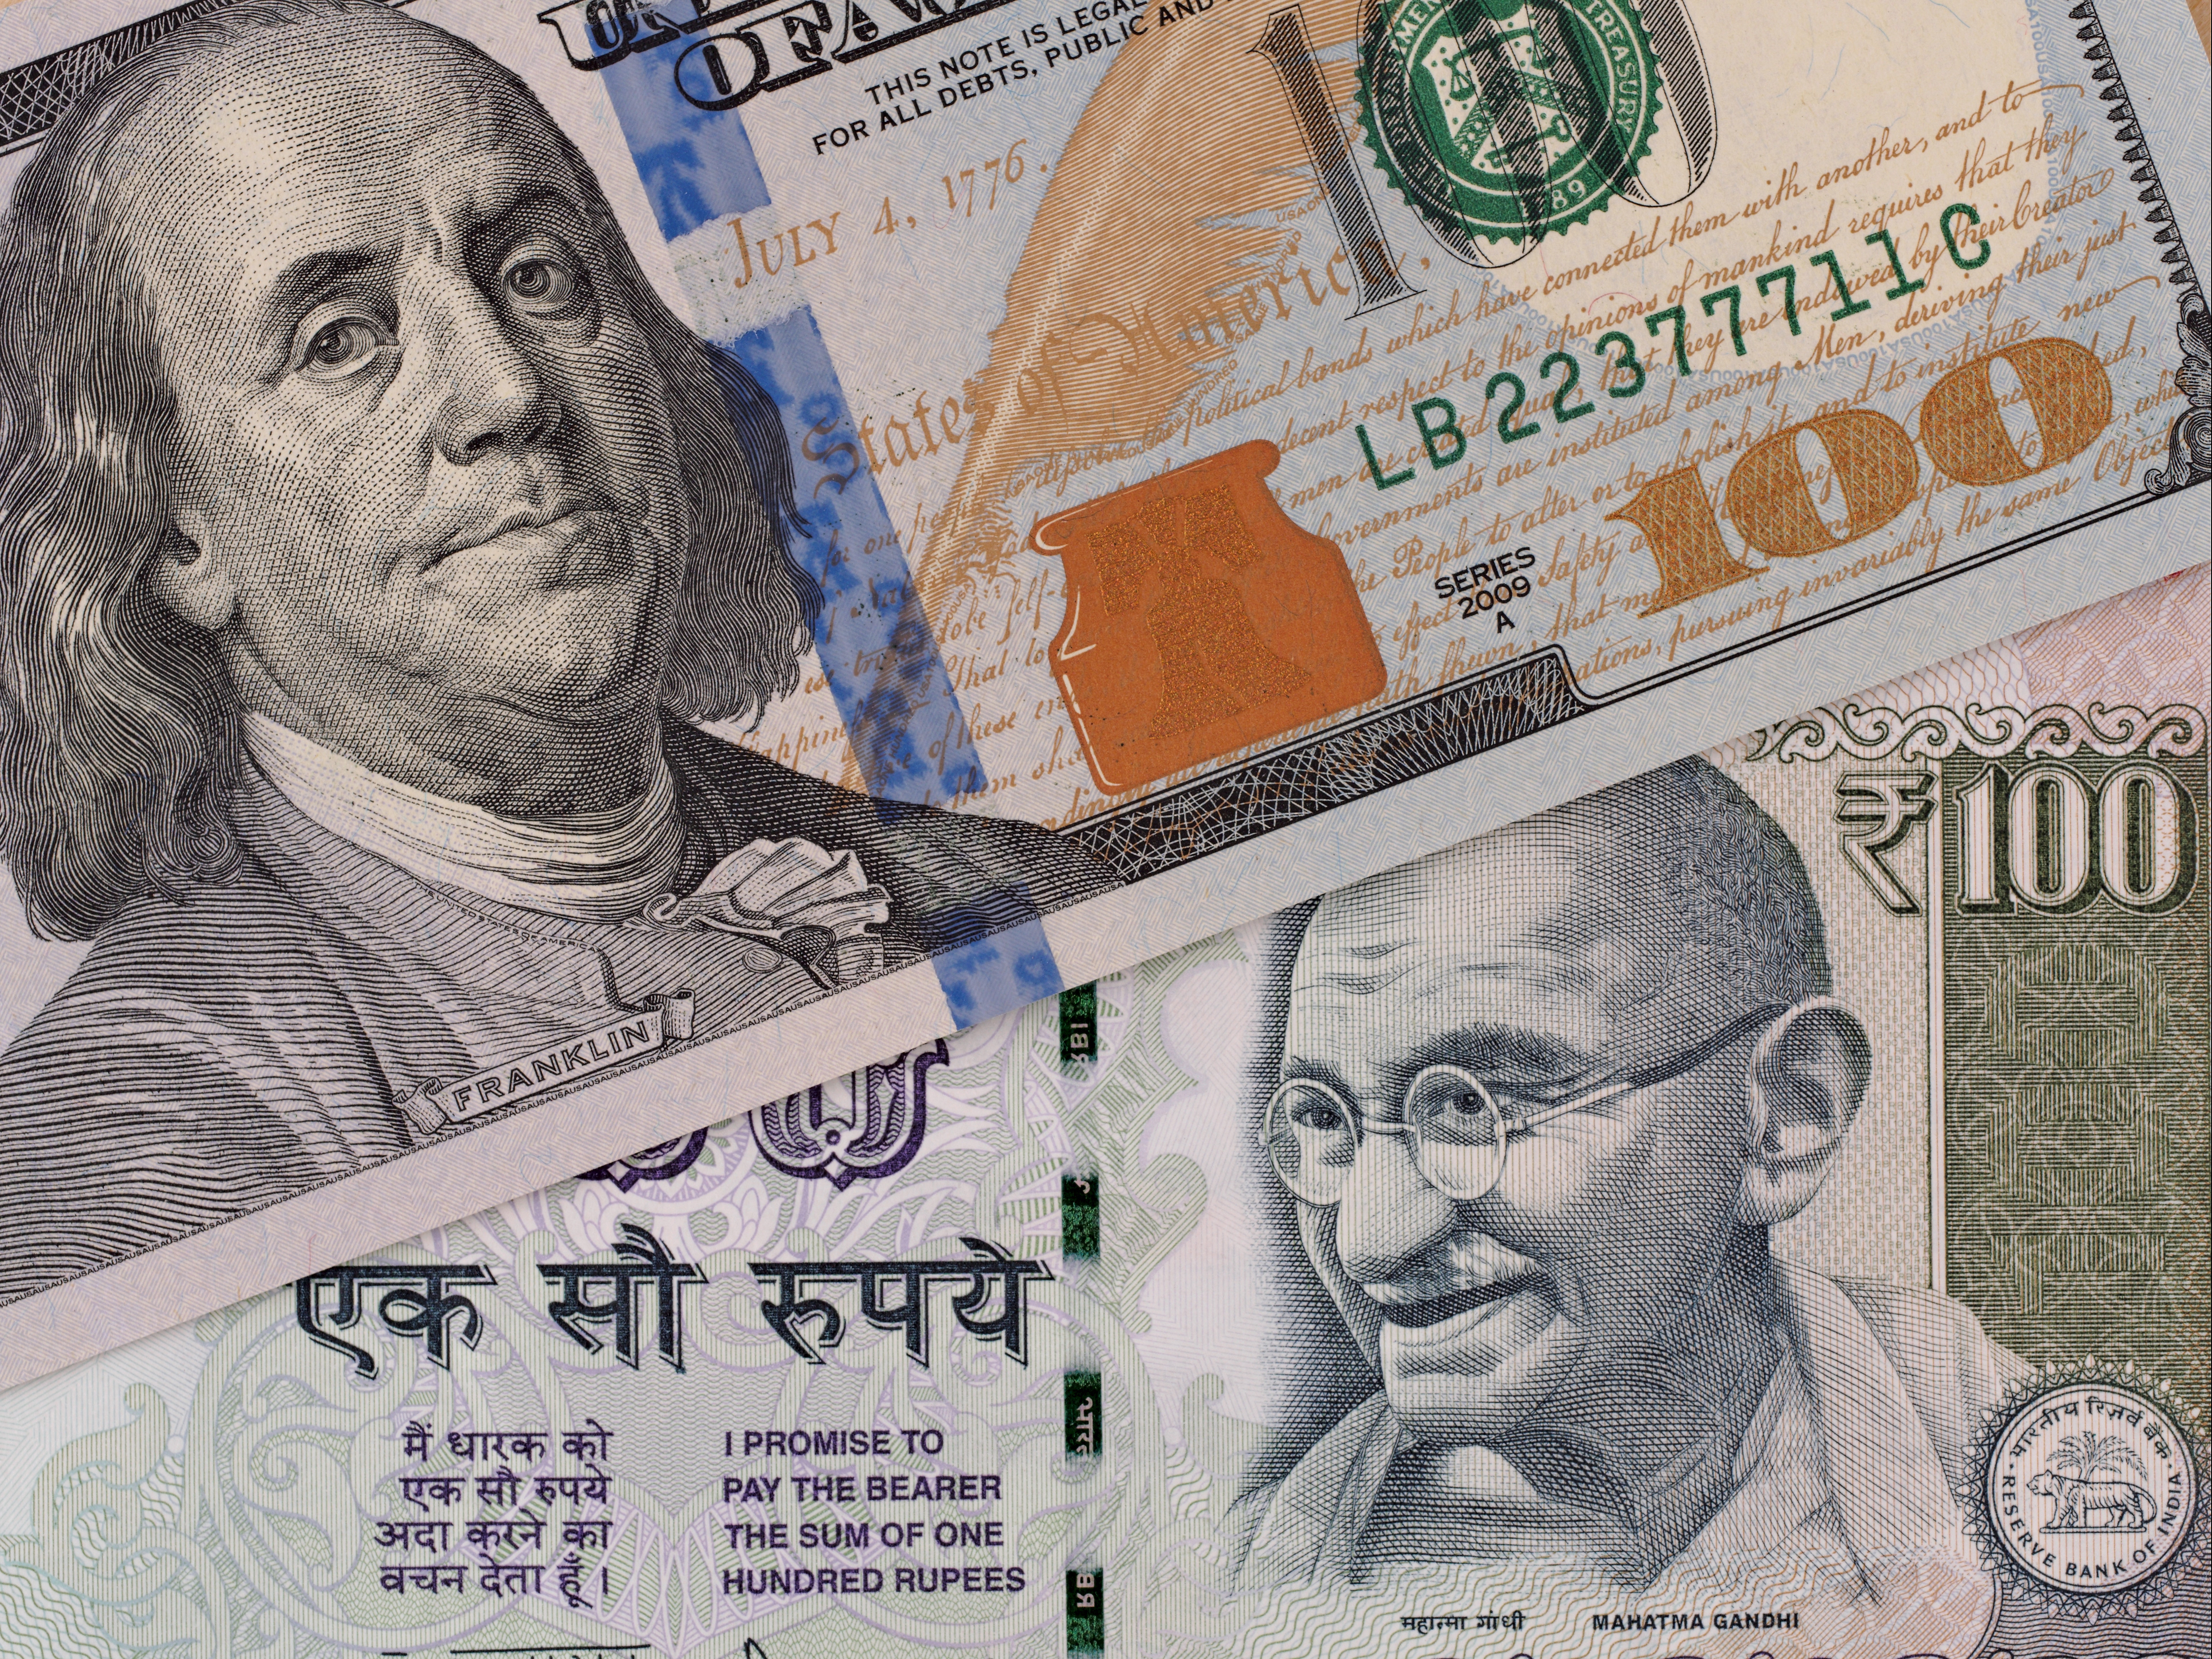 Indian Rupee Falls Against Dollar As Trade Deficit Widens To Record High: What Next?